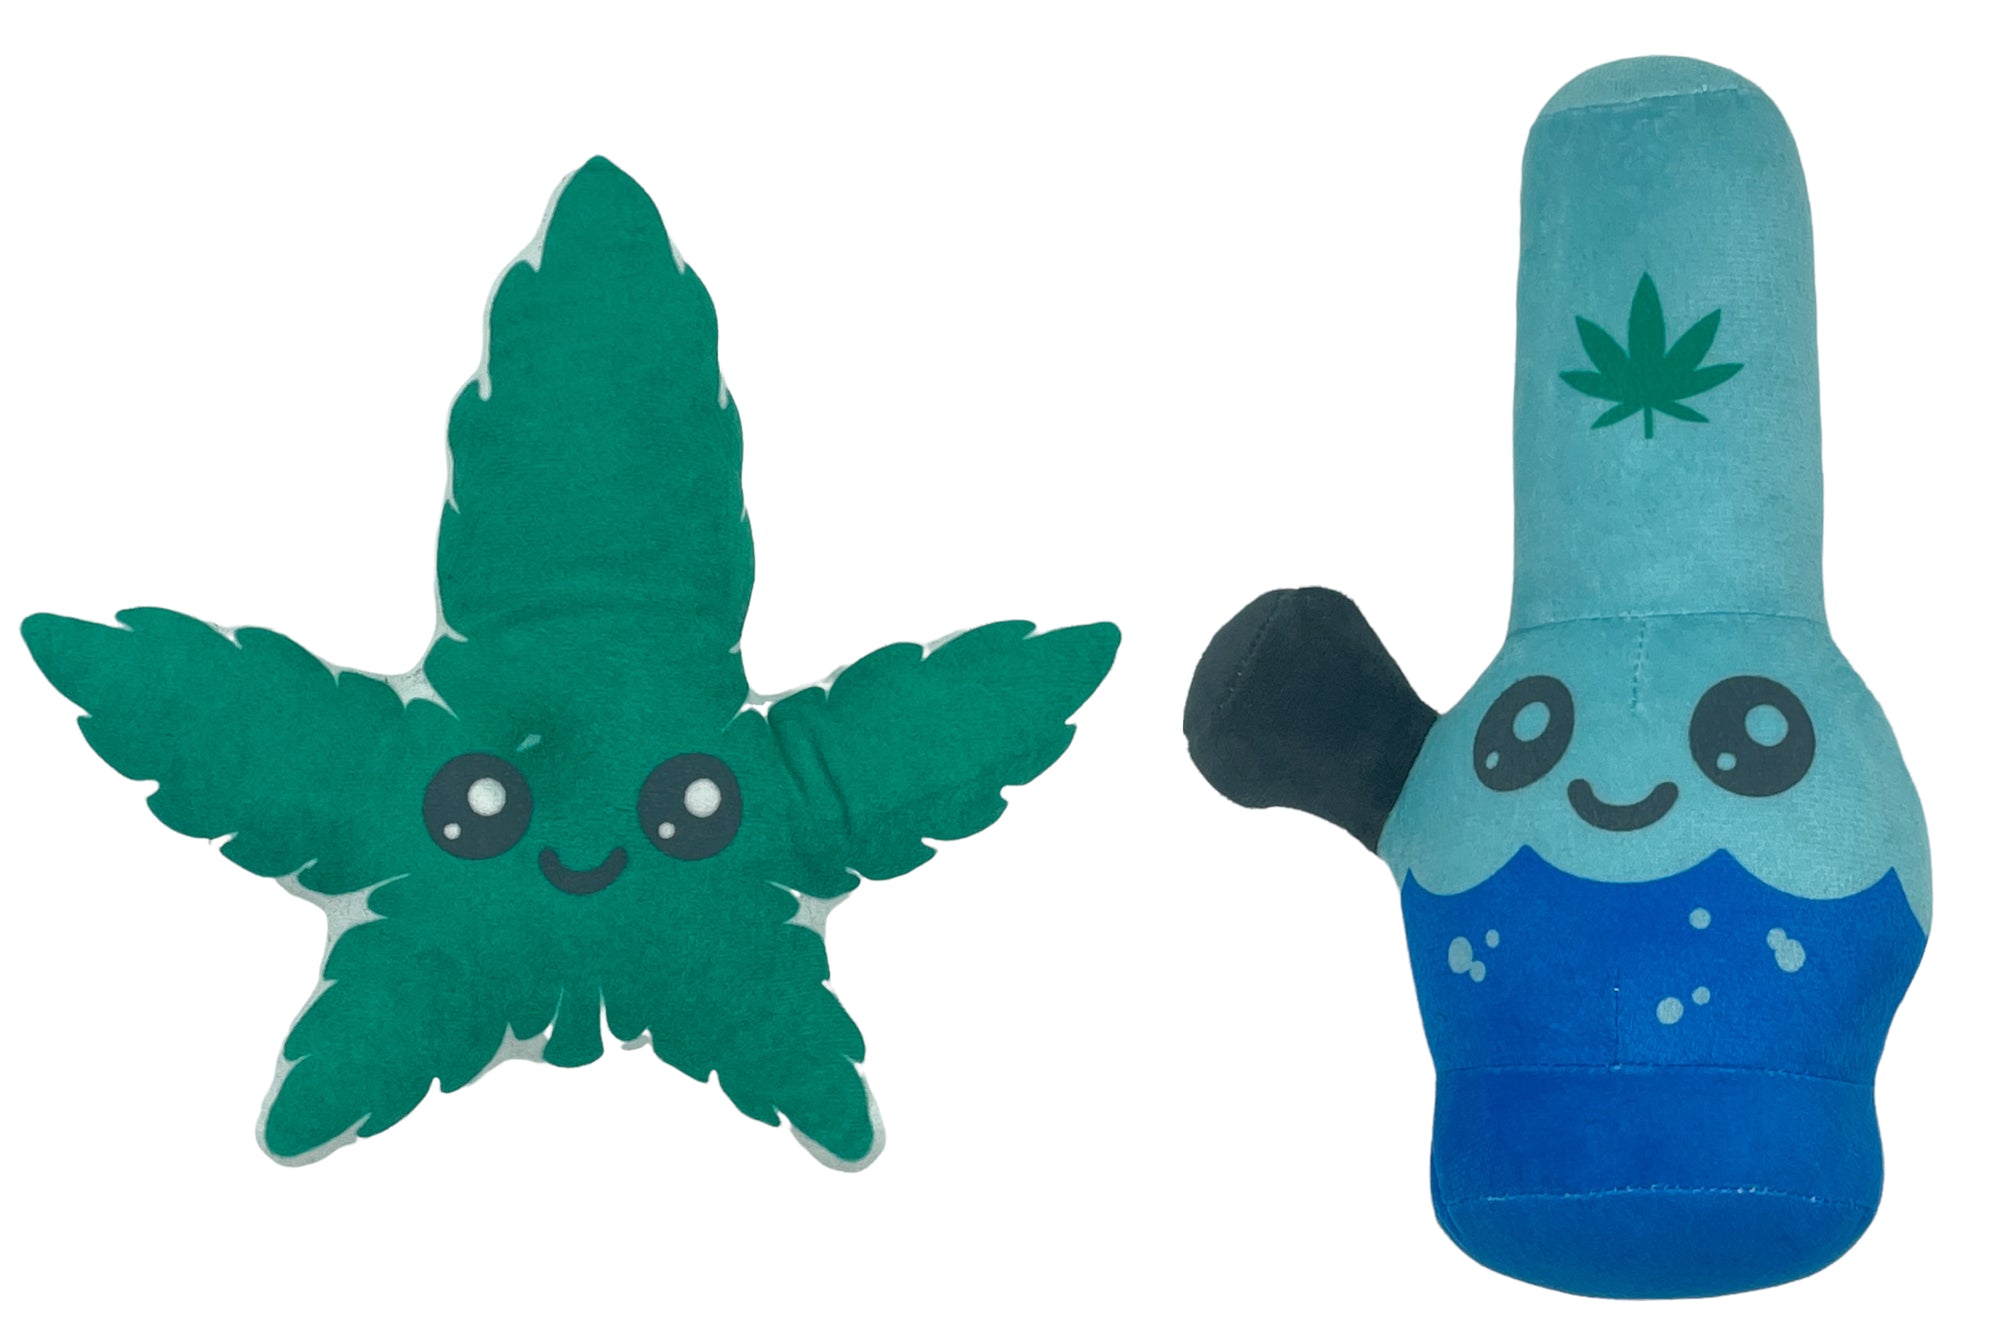 Funny Leaf and Pipe Weed Toys Nerdy 420 Tee